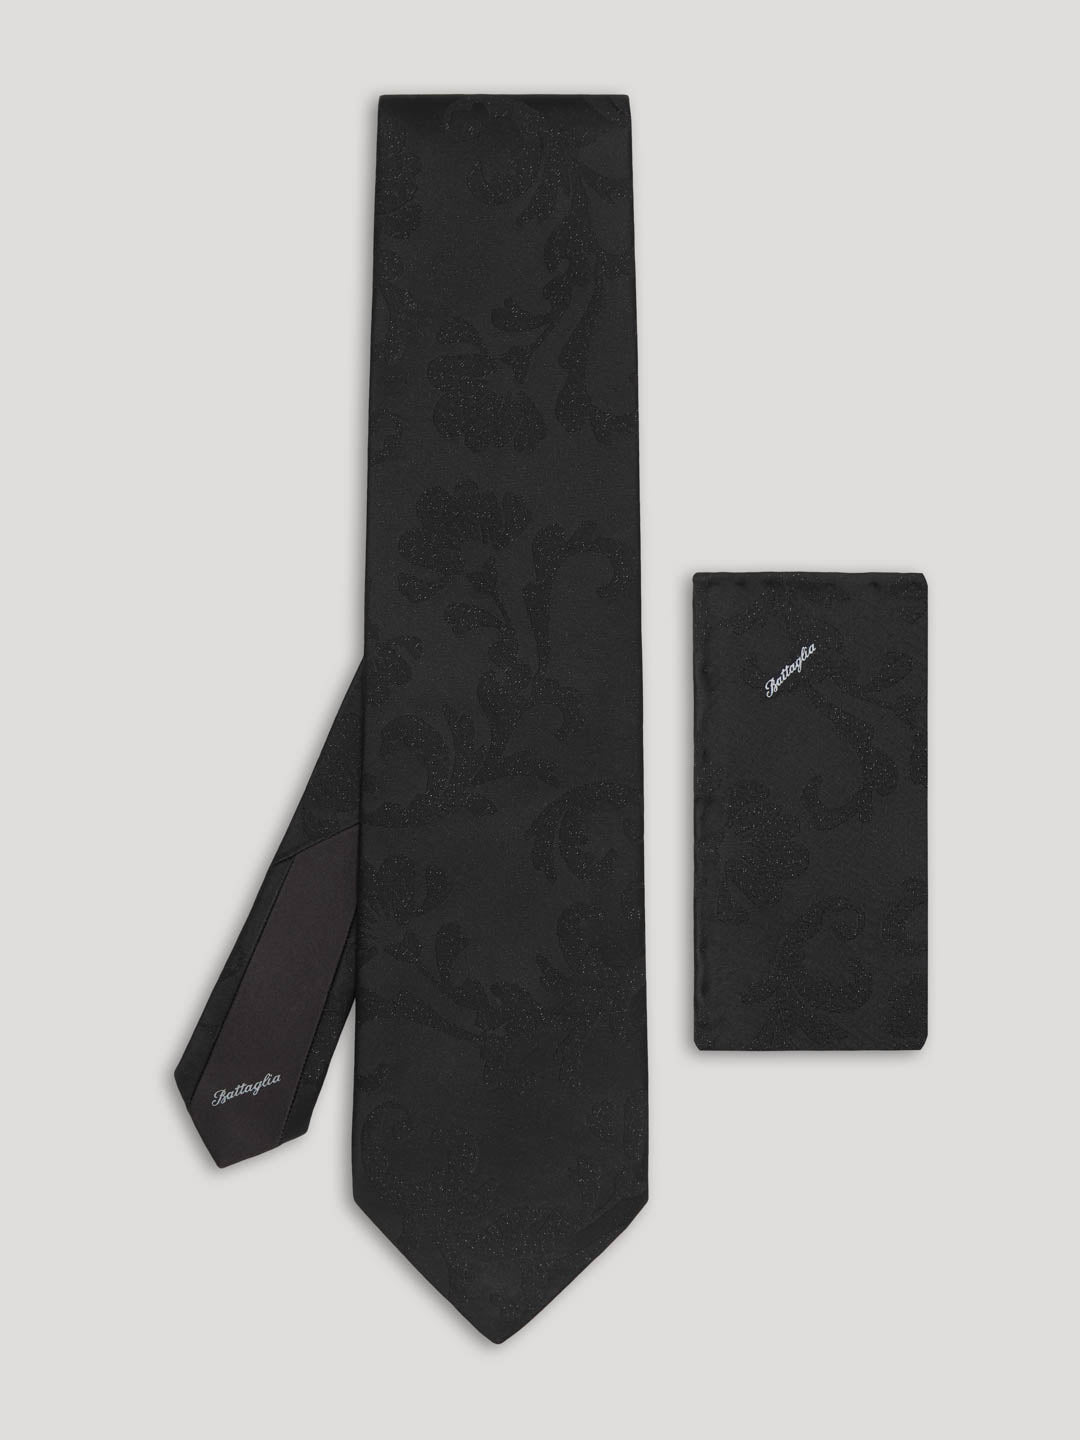 Black tone on tone silk floral tie with matching handkerchief. 